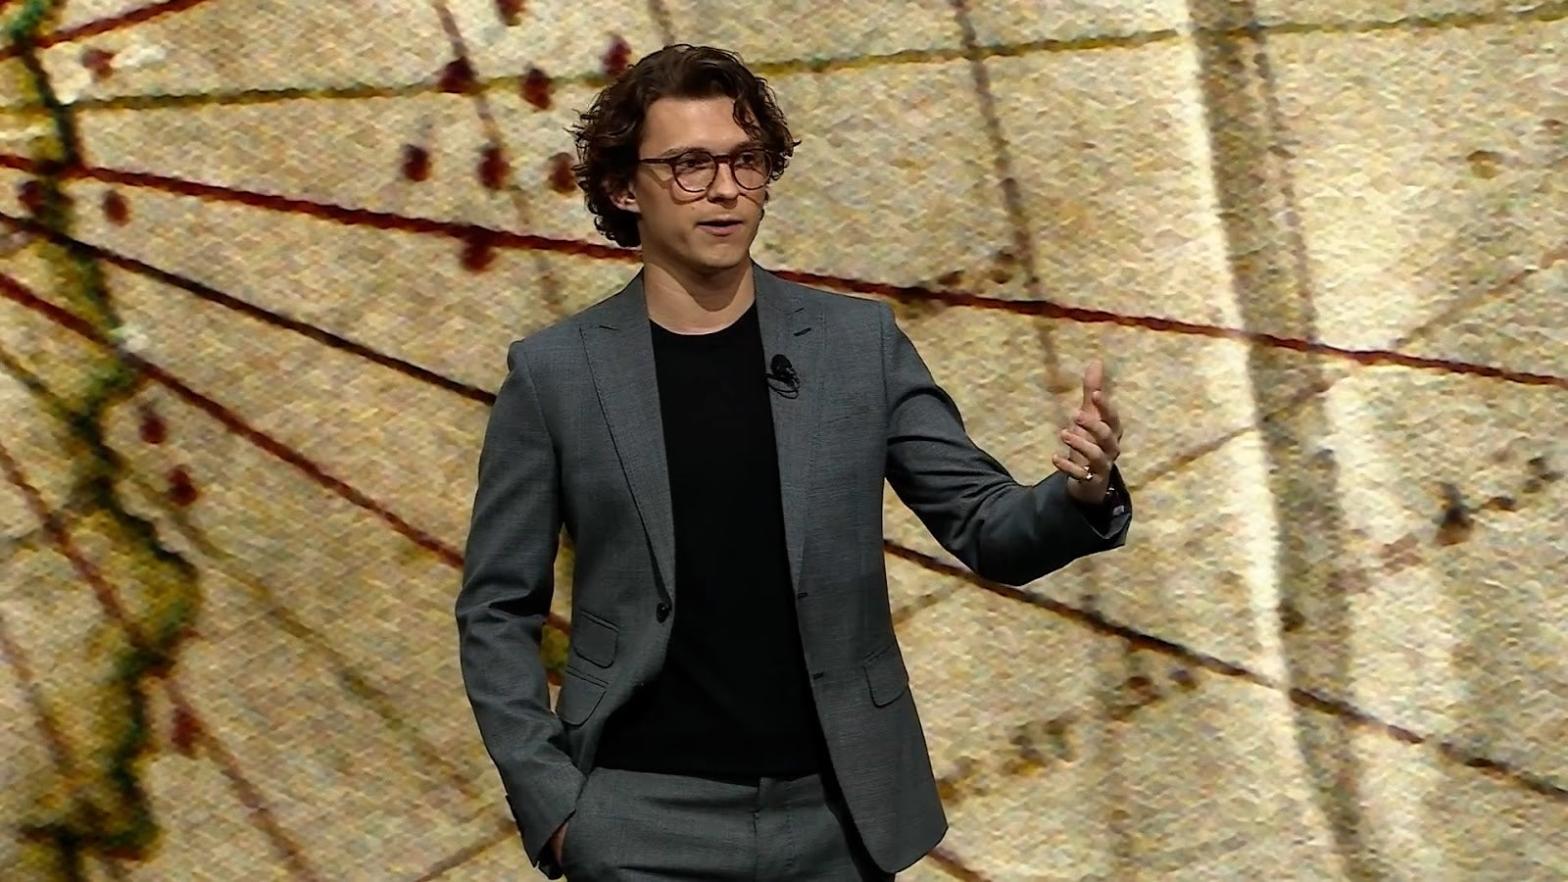 Tom Holland talking about Uncharted at the Sony CES keynote event.